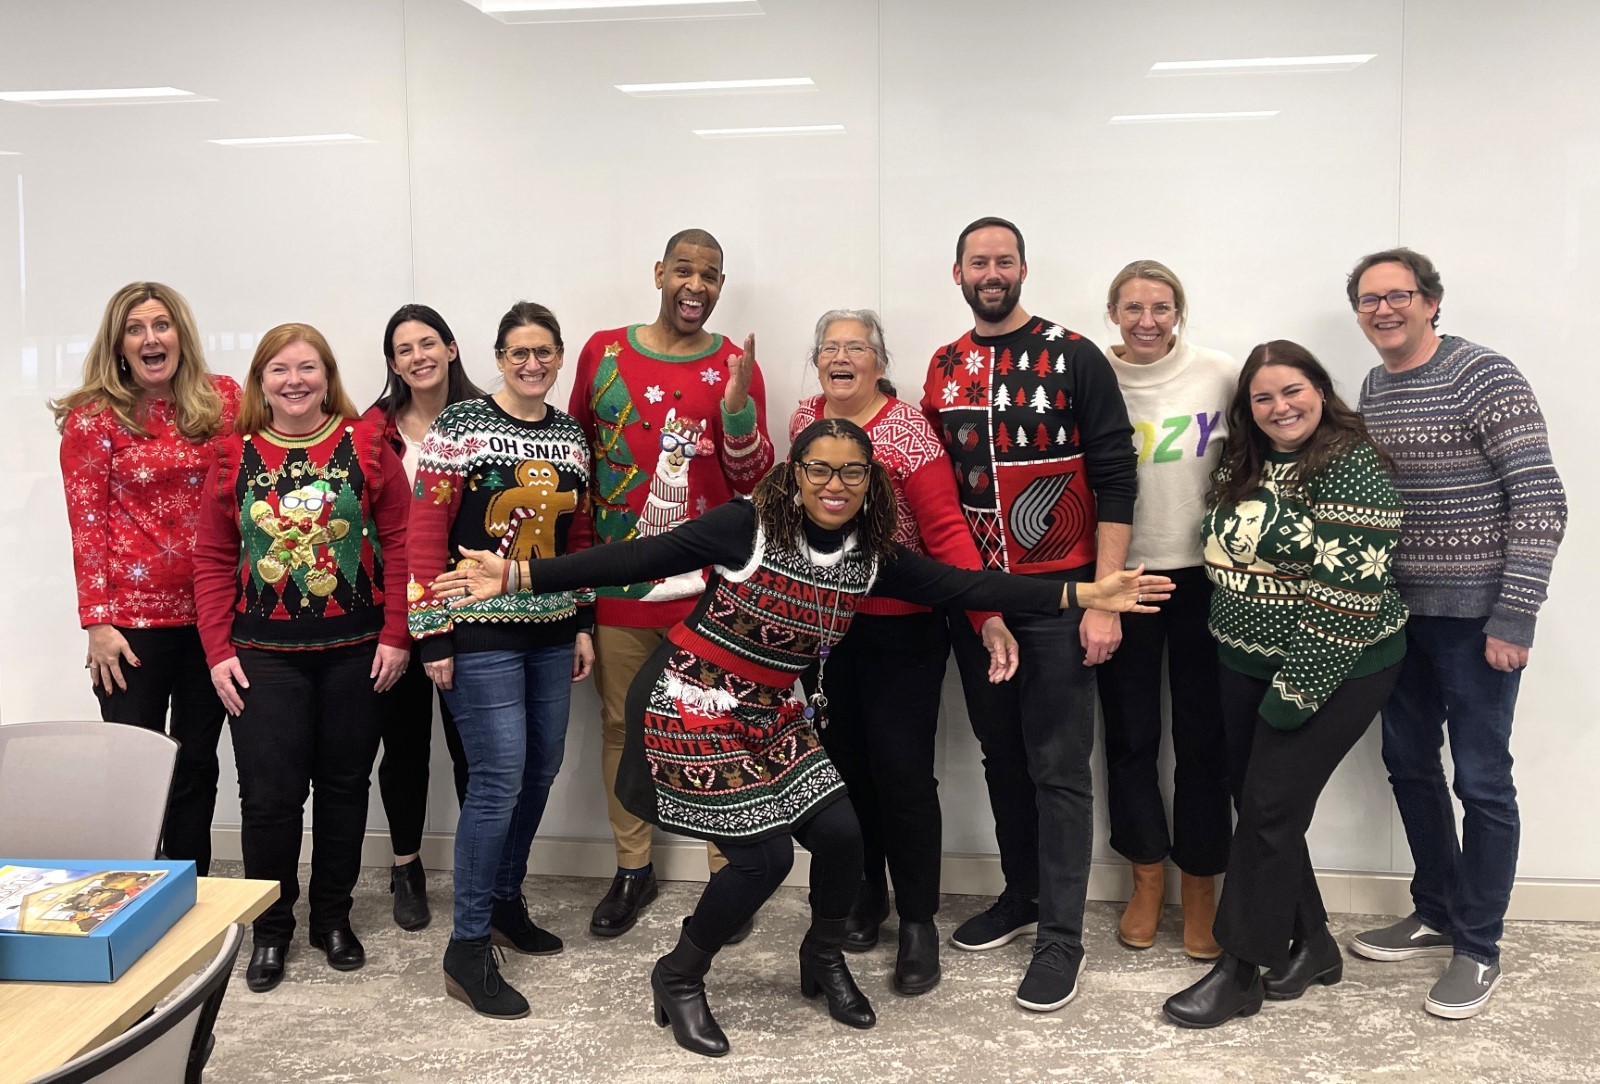 Group of 11 Murdock Trust employees wearing fun holiday sweaters and smiling together